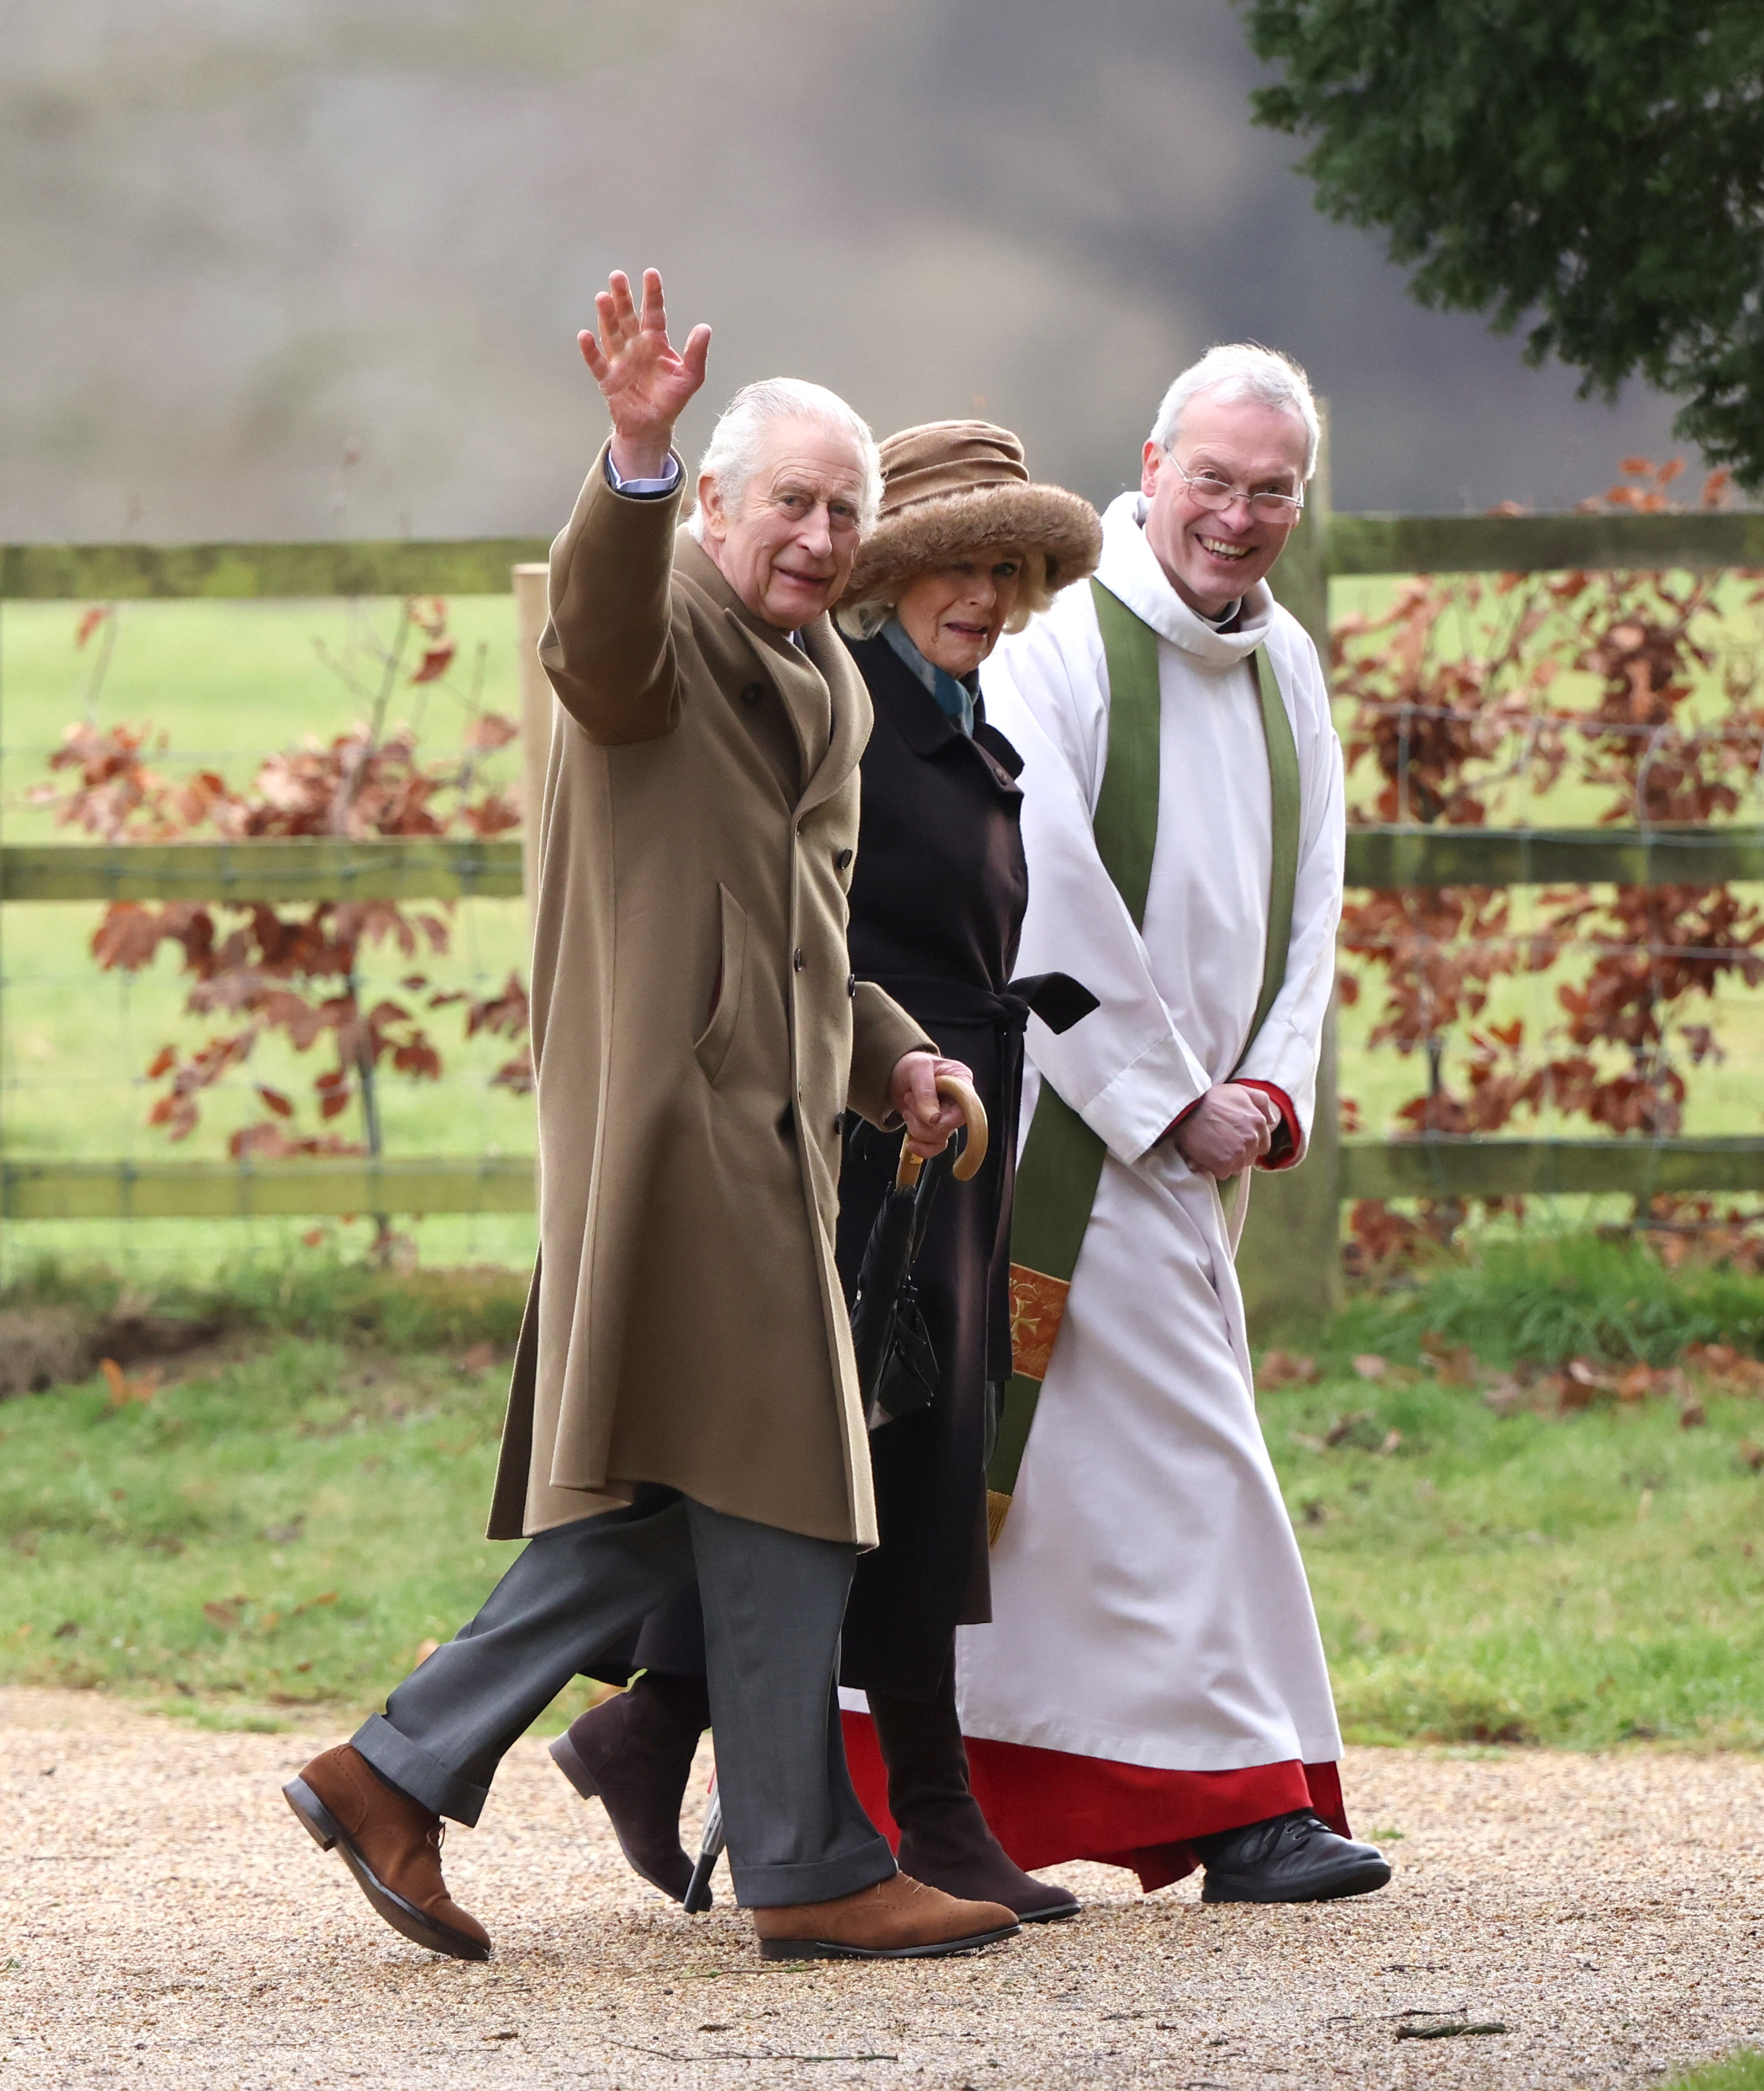 On Sunday, the King was pictured smiling and waving as he walked to church at Sandringham - his first sighting since leaving hospital